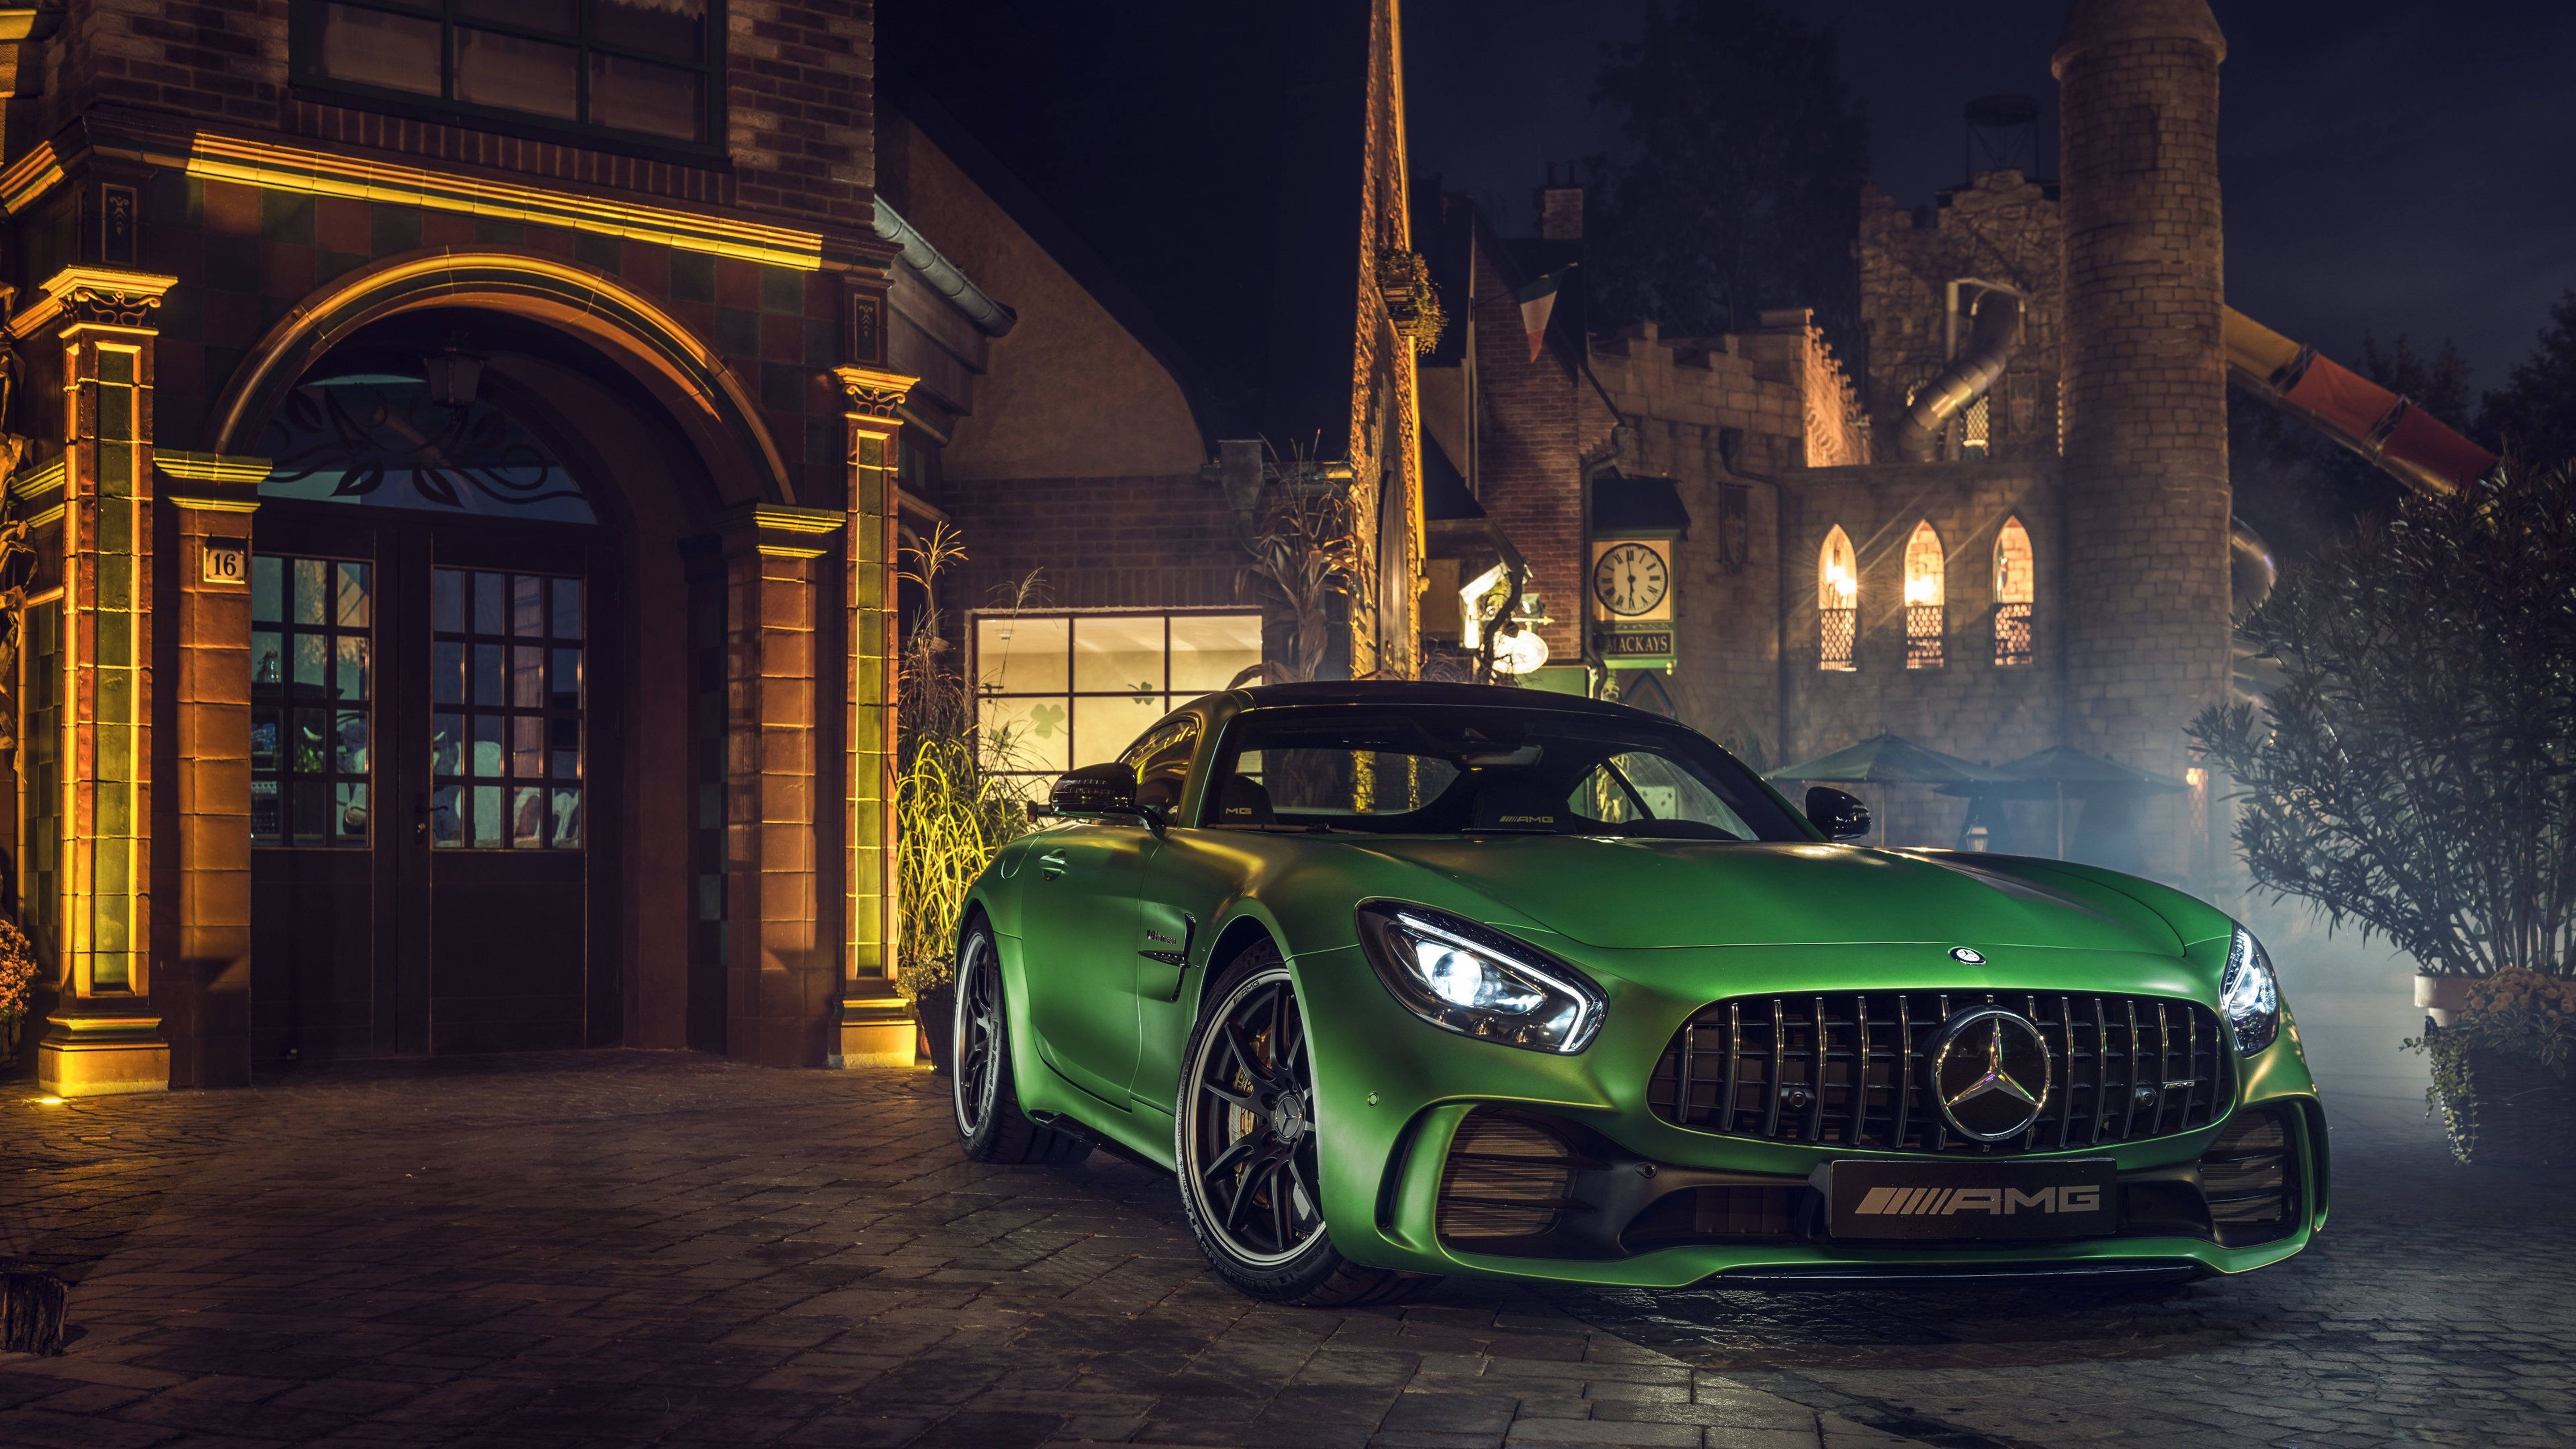 Caption: Striking Elegance - A Mercedes-amg In A Captivating Green Hue Standing Outside A Modernistic Building. Wallpaper